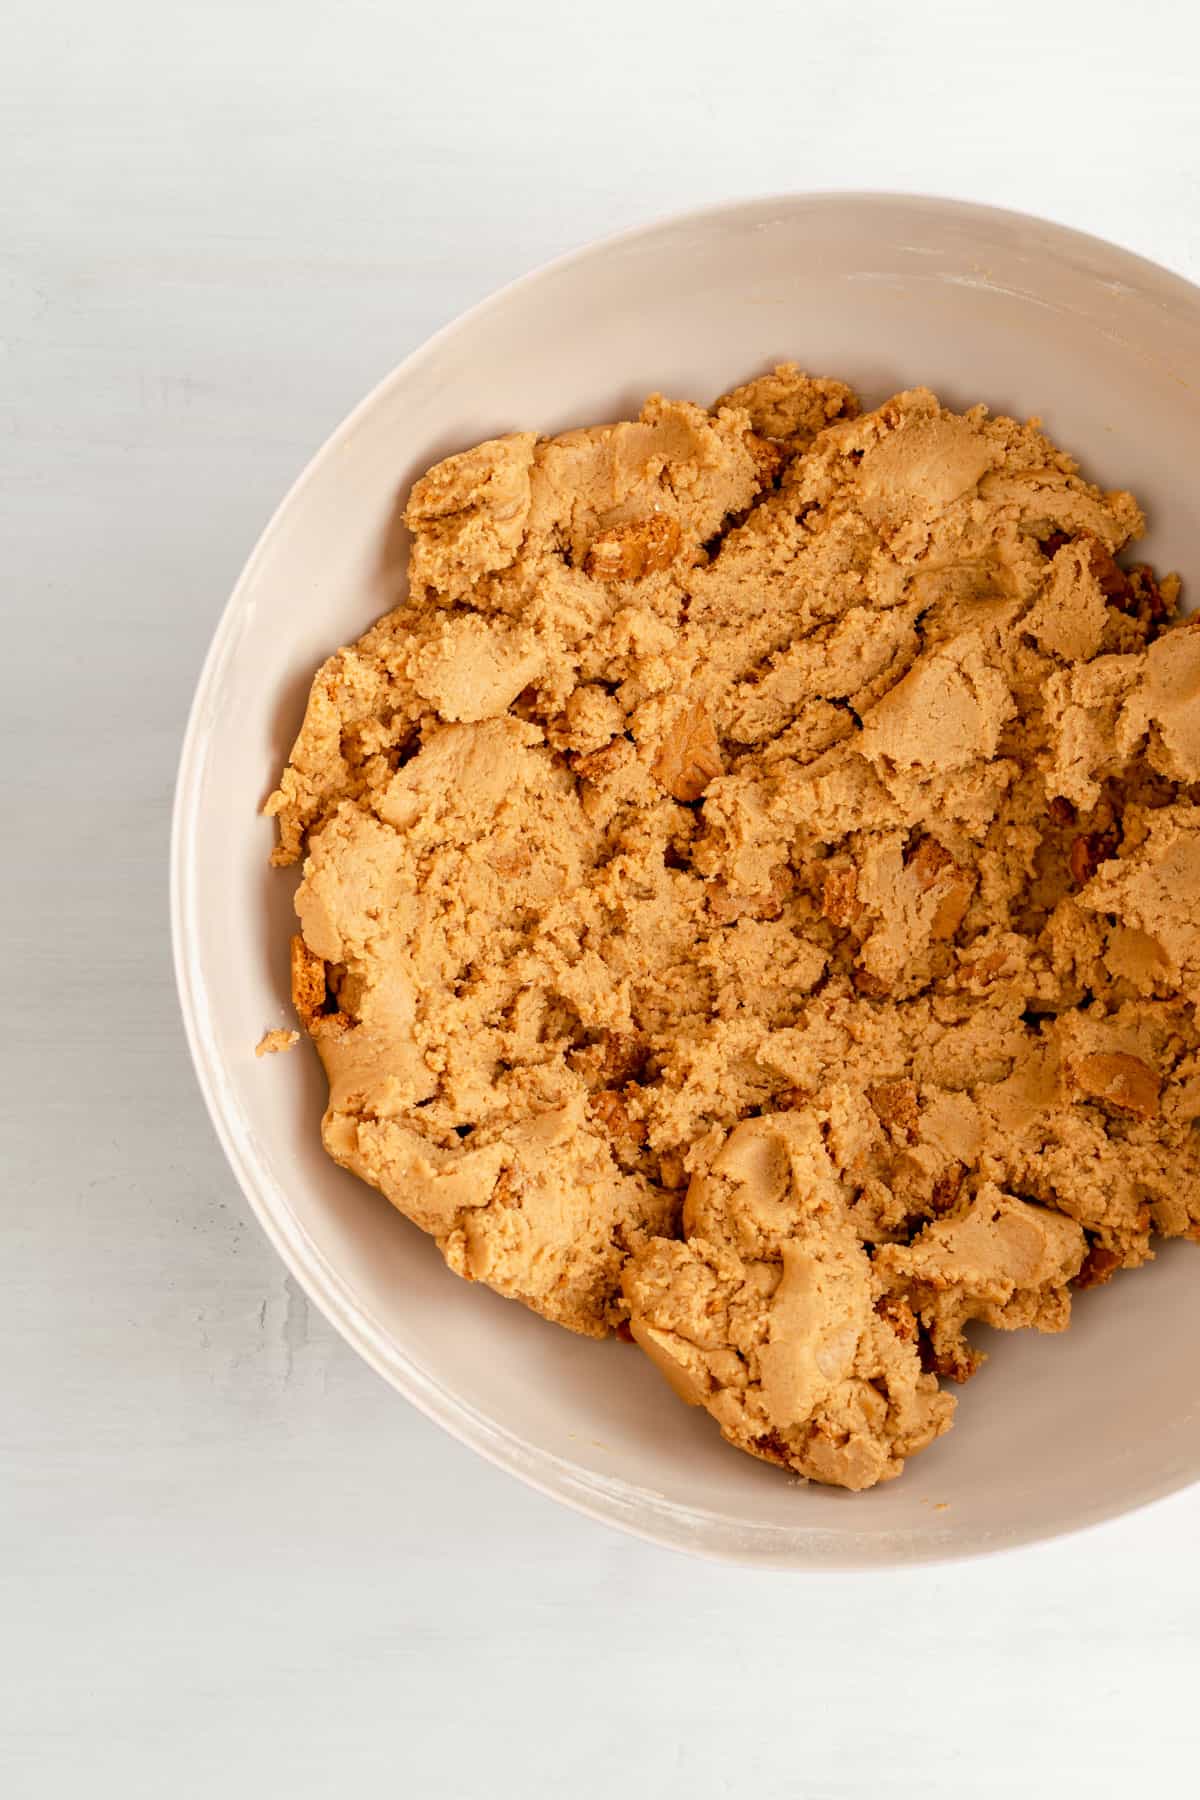 a mixing bowl of finished biscoff cookie dough with crushed cookies mixed in.